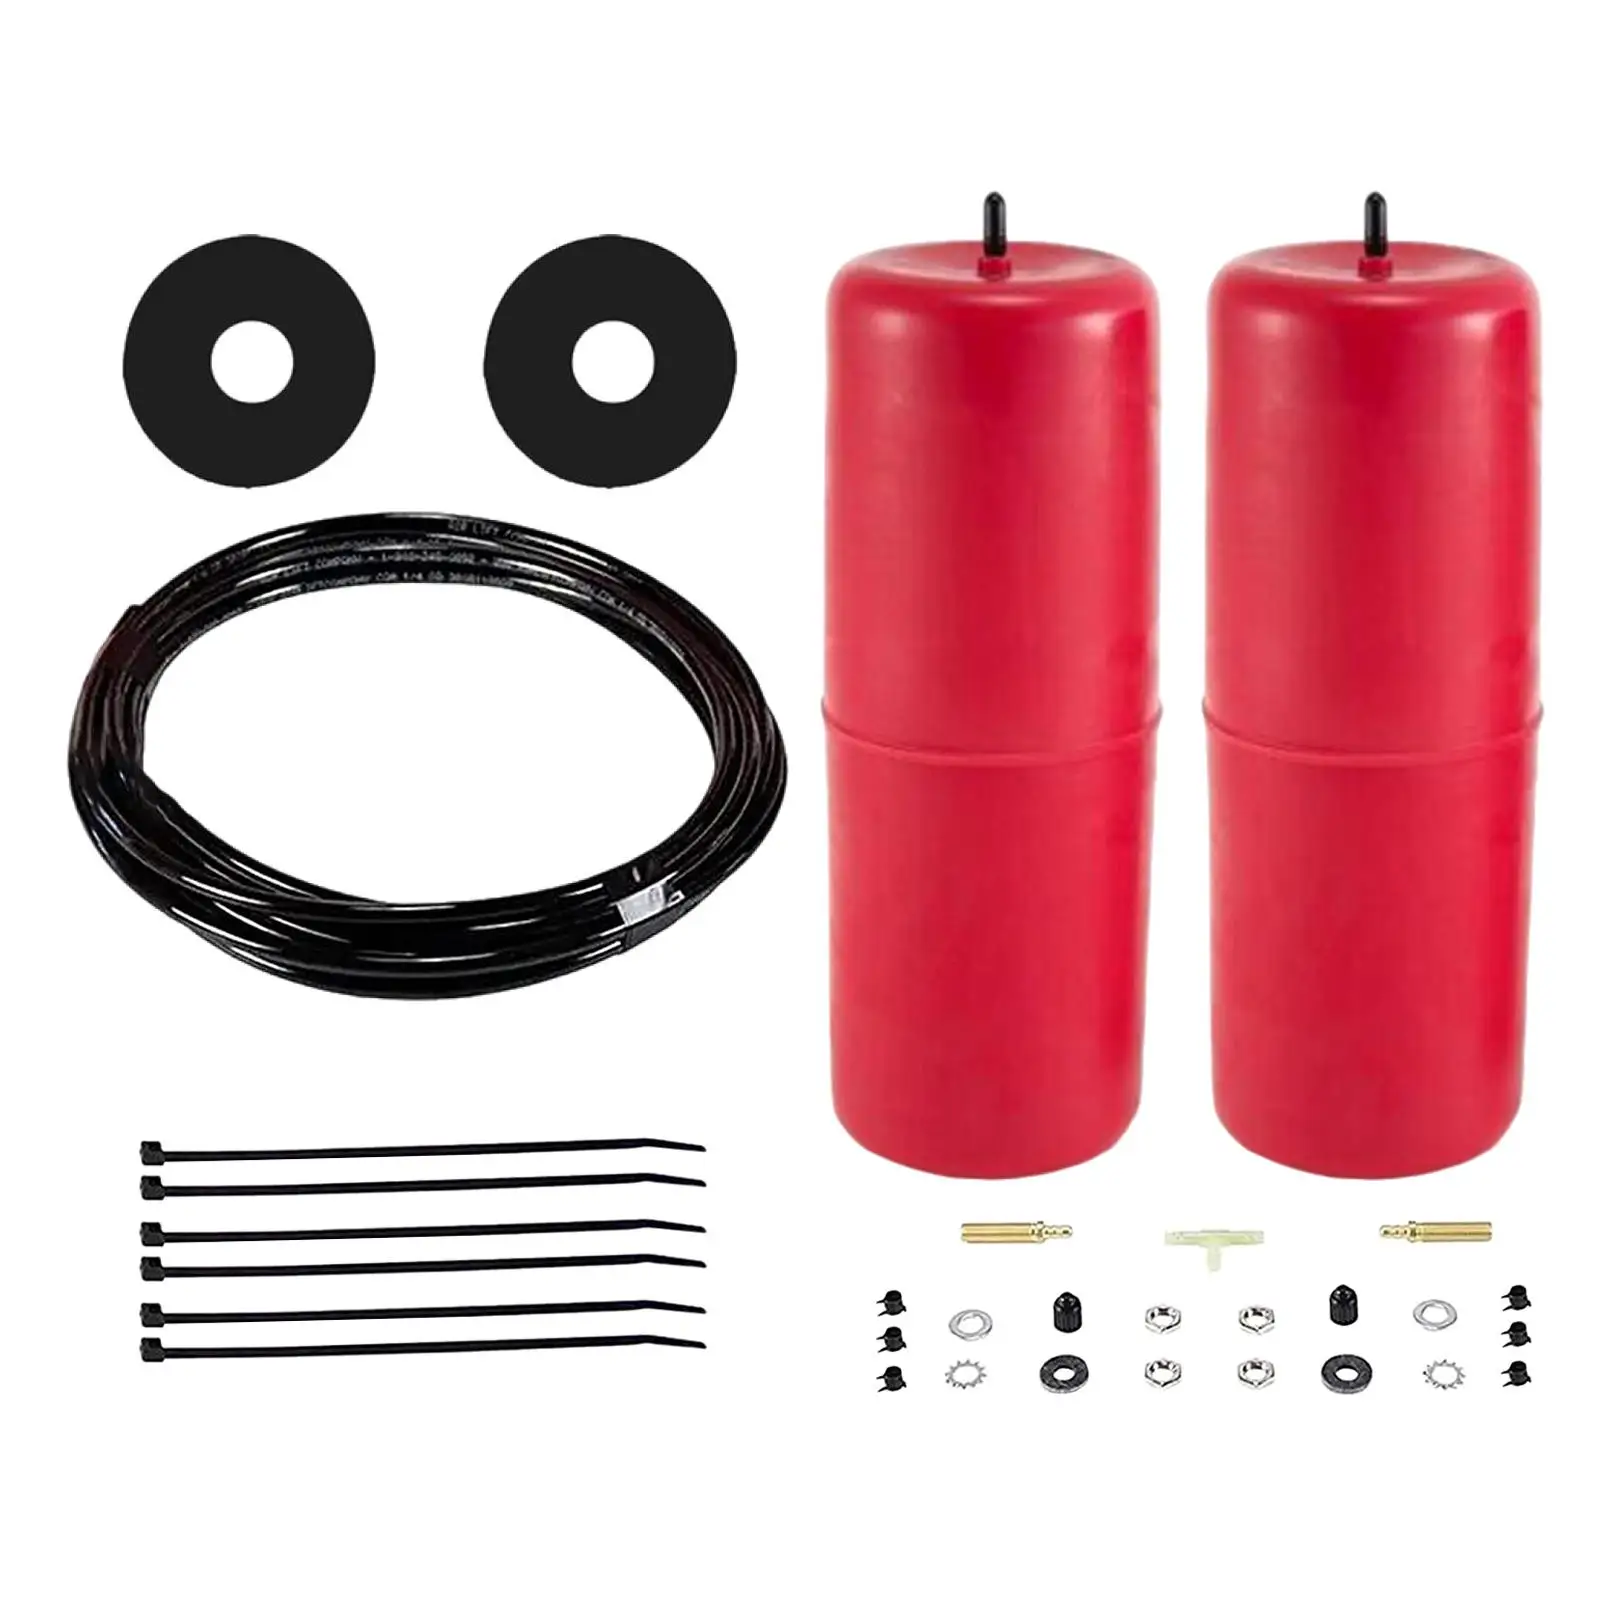 Air Suspension Kit 60818 Accessories 1000 lbs Load Professional Manufacturing